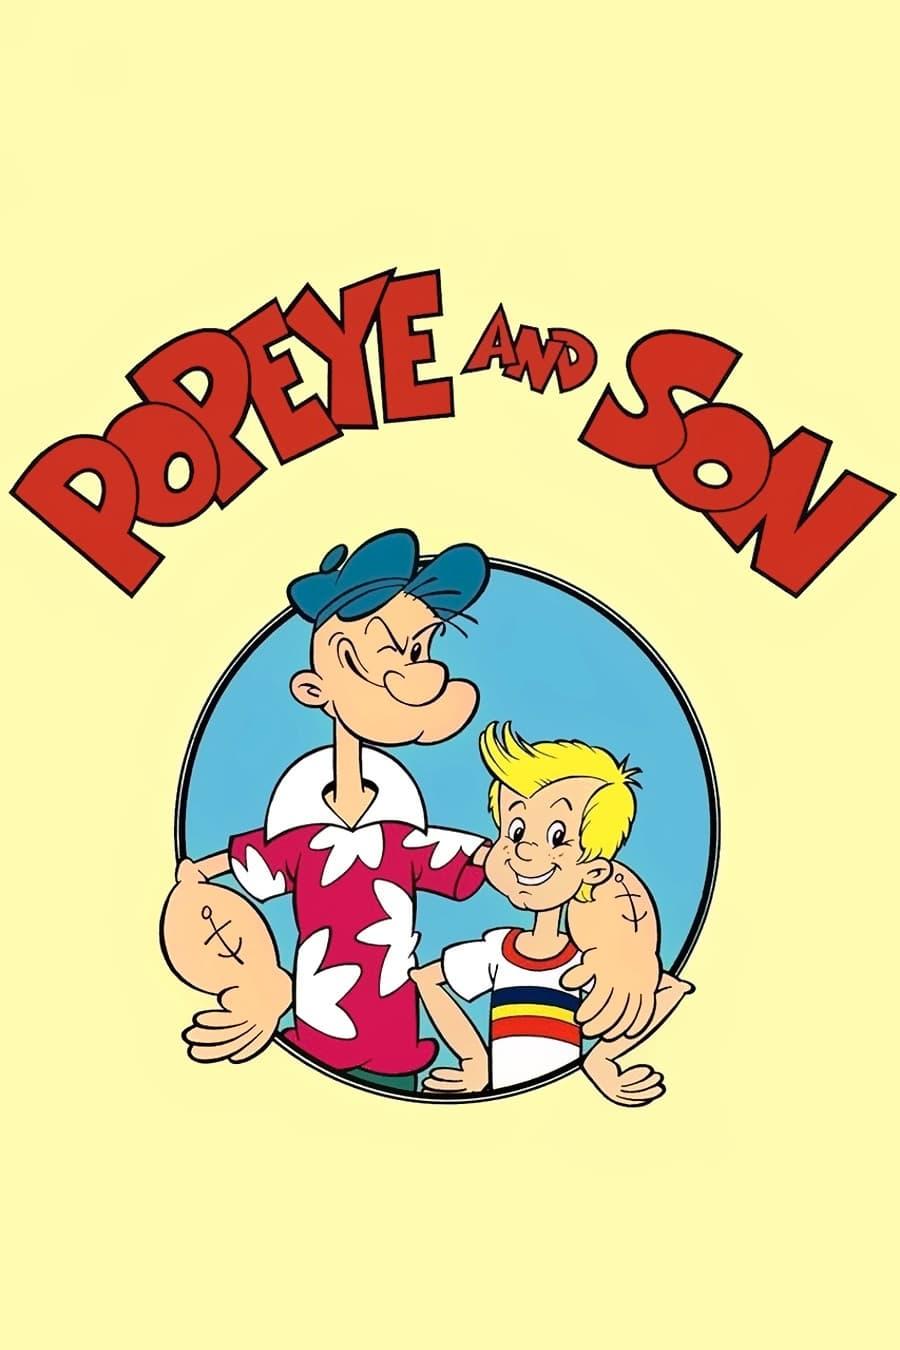 Popeye and Son poster